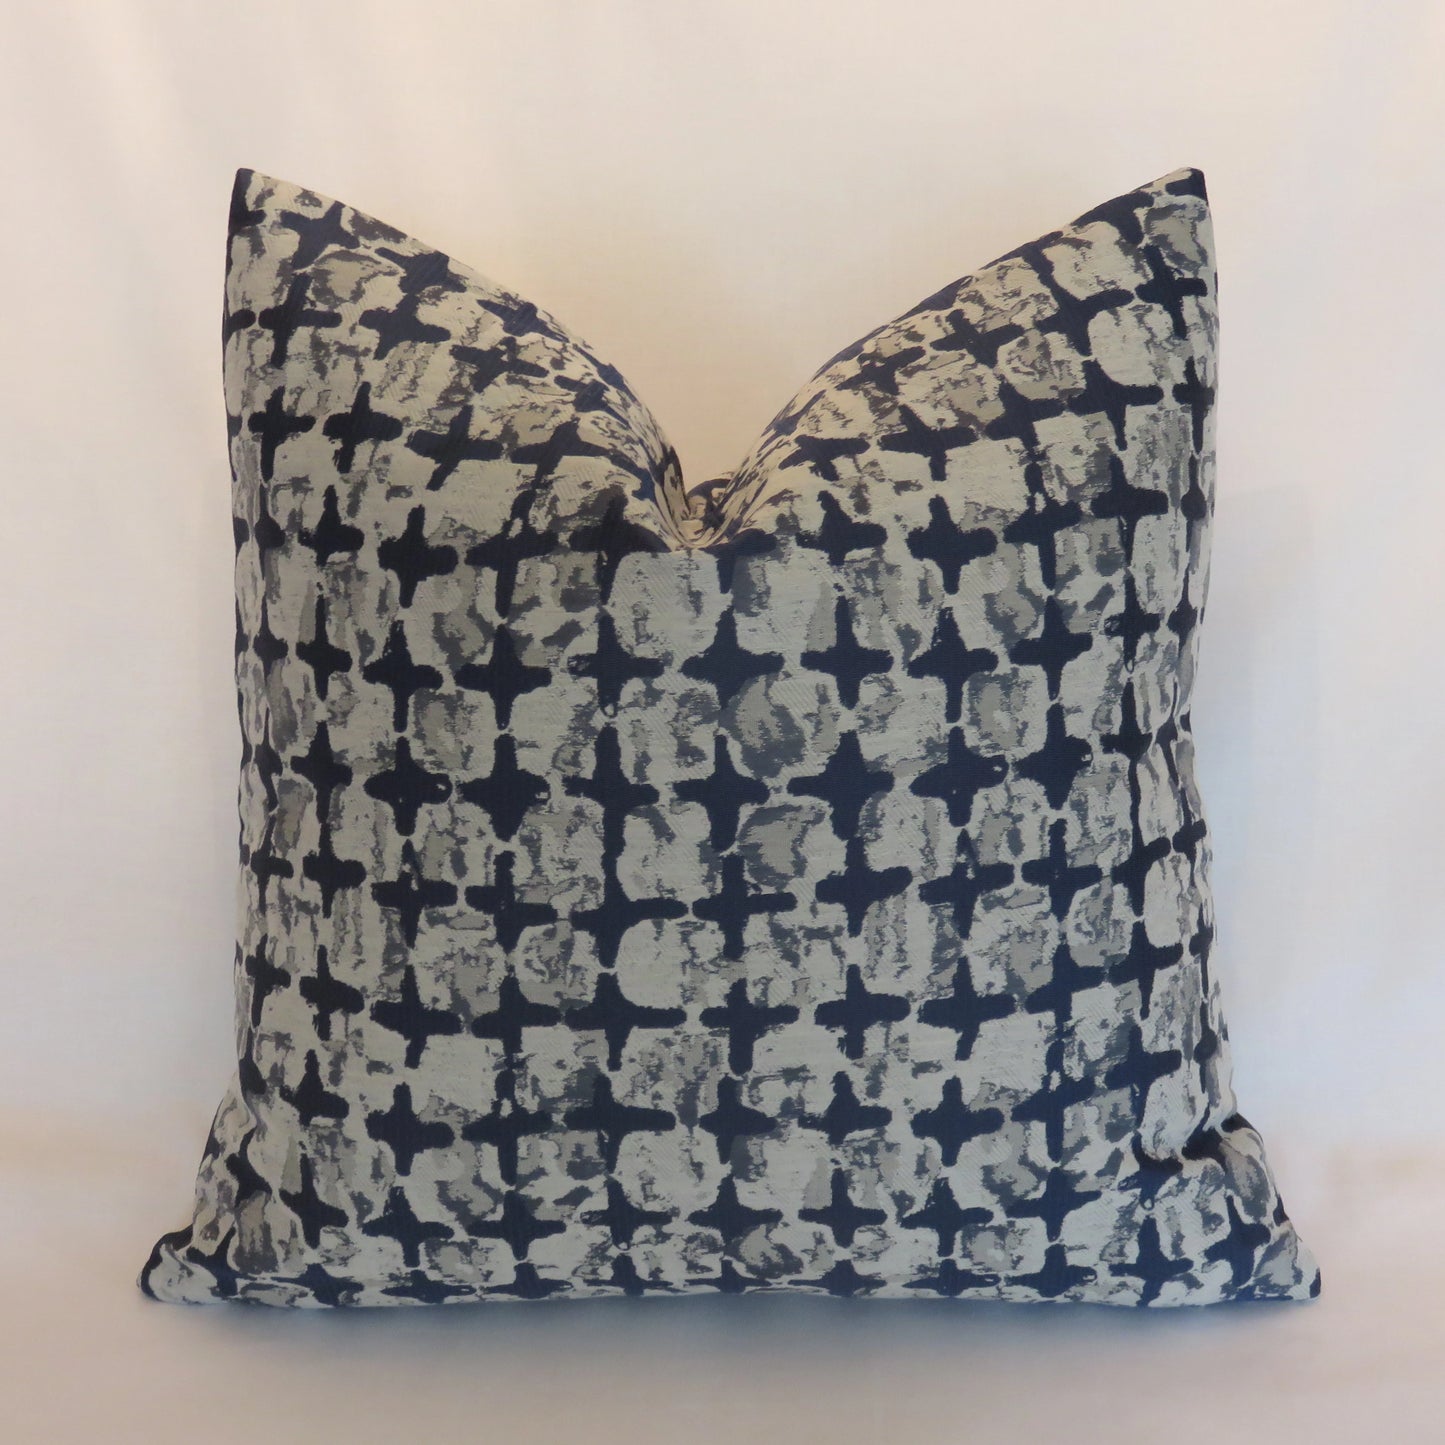 mod ikat squares pillow covers in grey and indigo blue